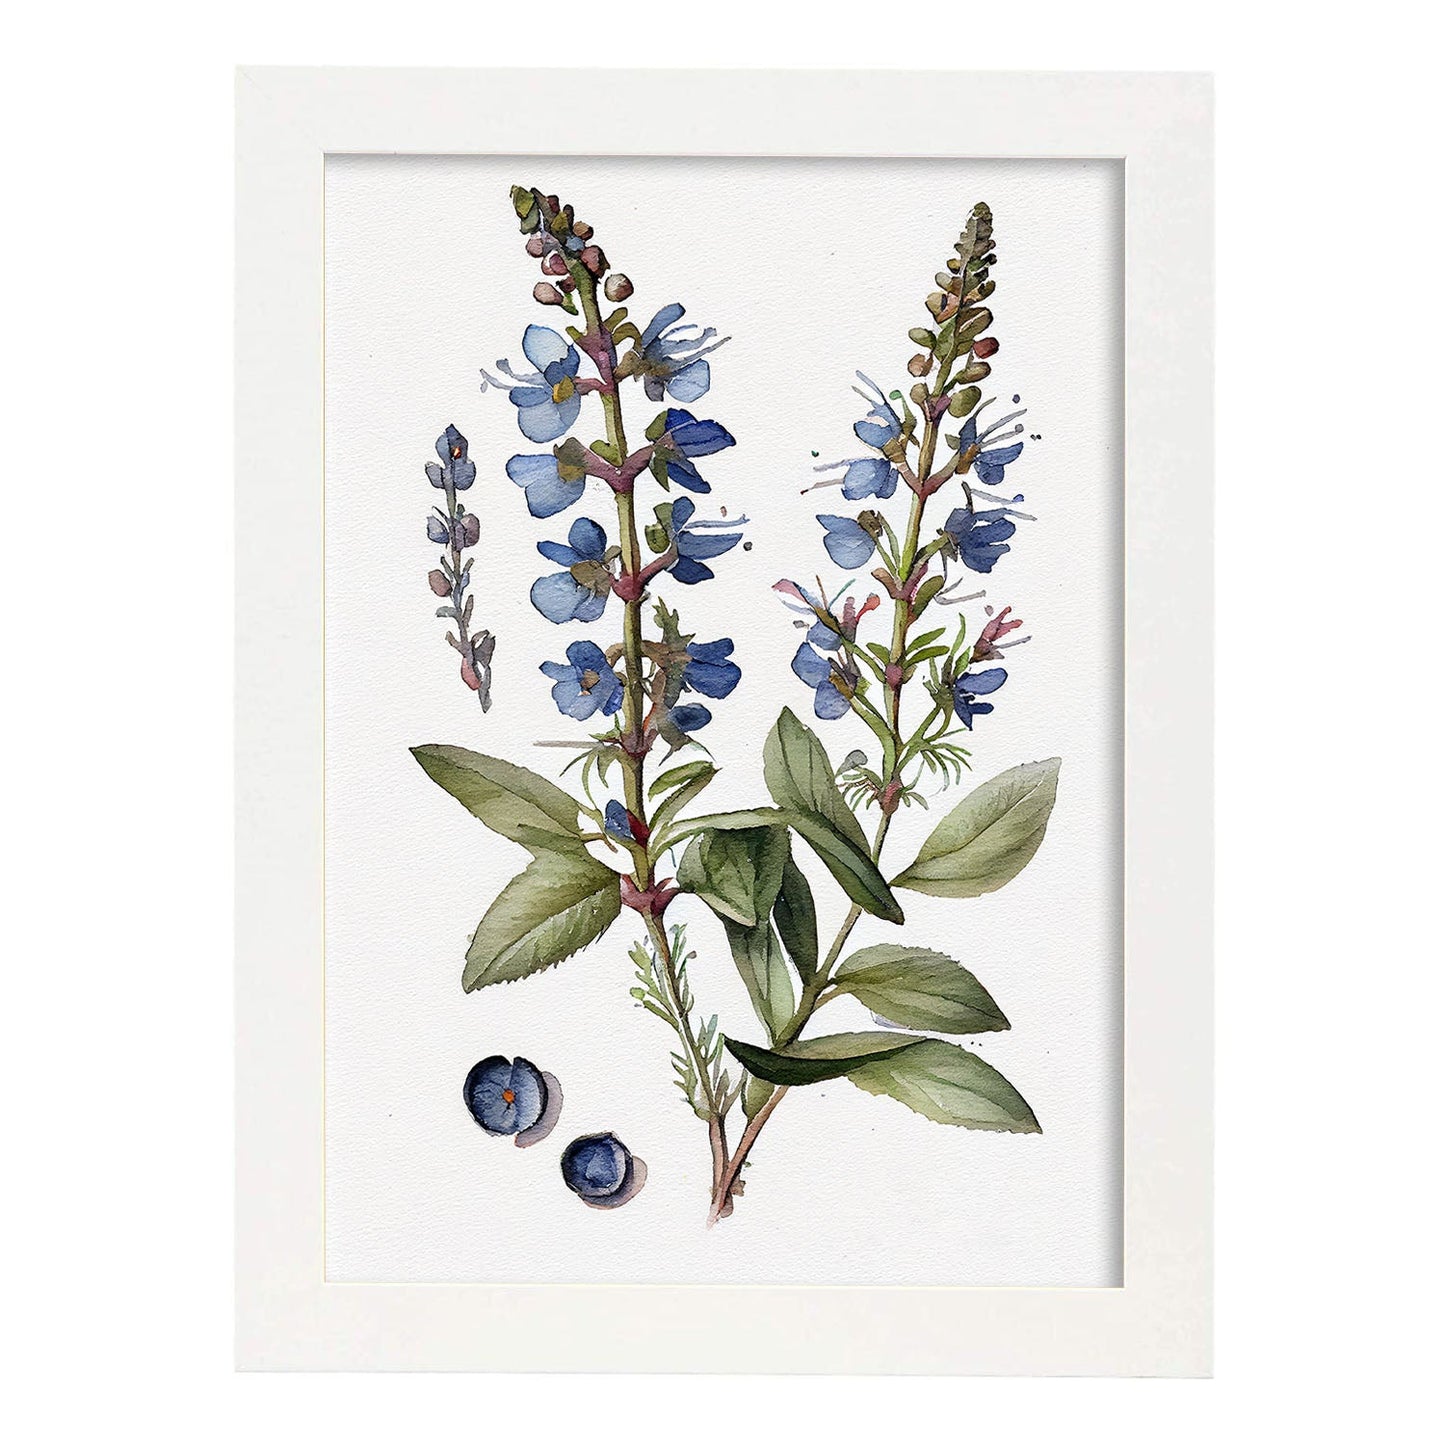 Nacnic watercolor minmal Speedwell_2. Aesthetic Wall Art Prints for Bedroom or Living Room Design.-Artwork-Nacnic-A4-Marco Blanco-Nacnic Estudio SL